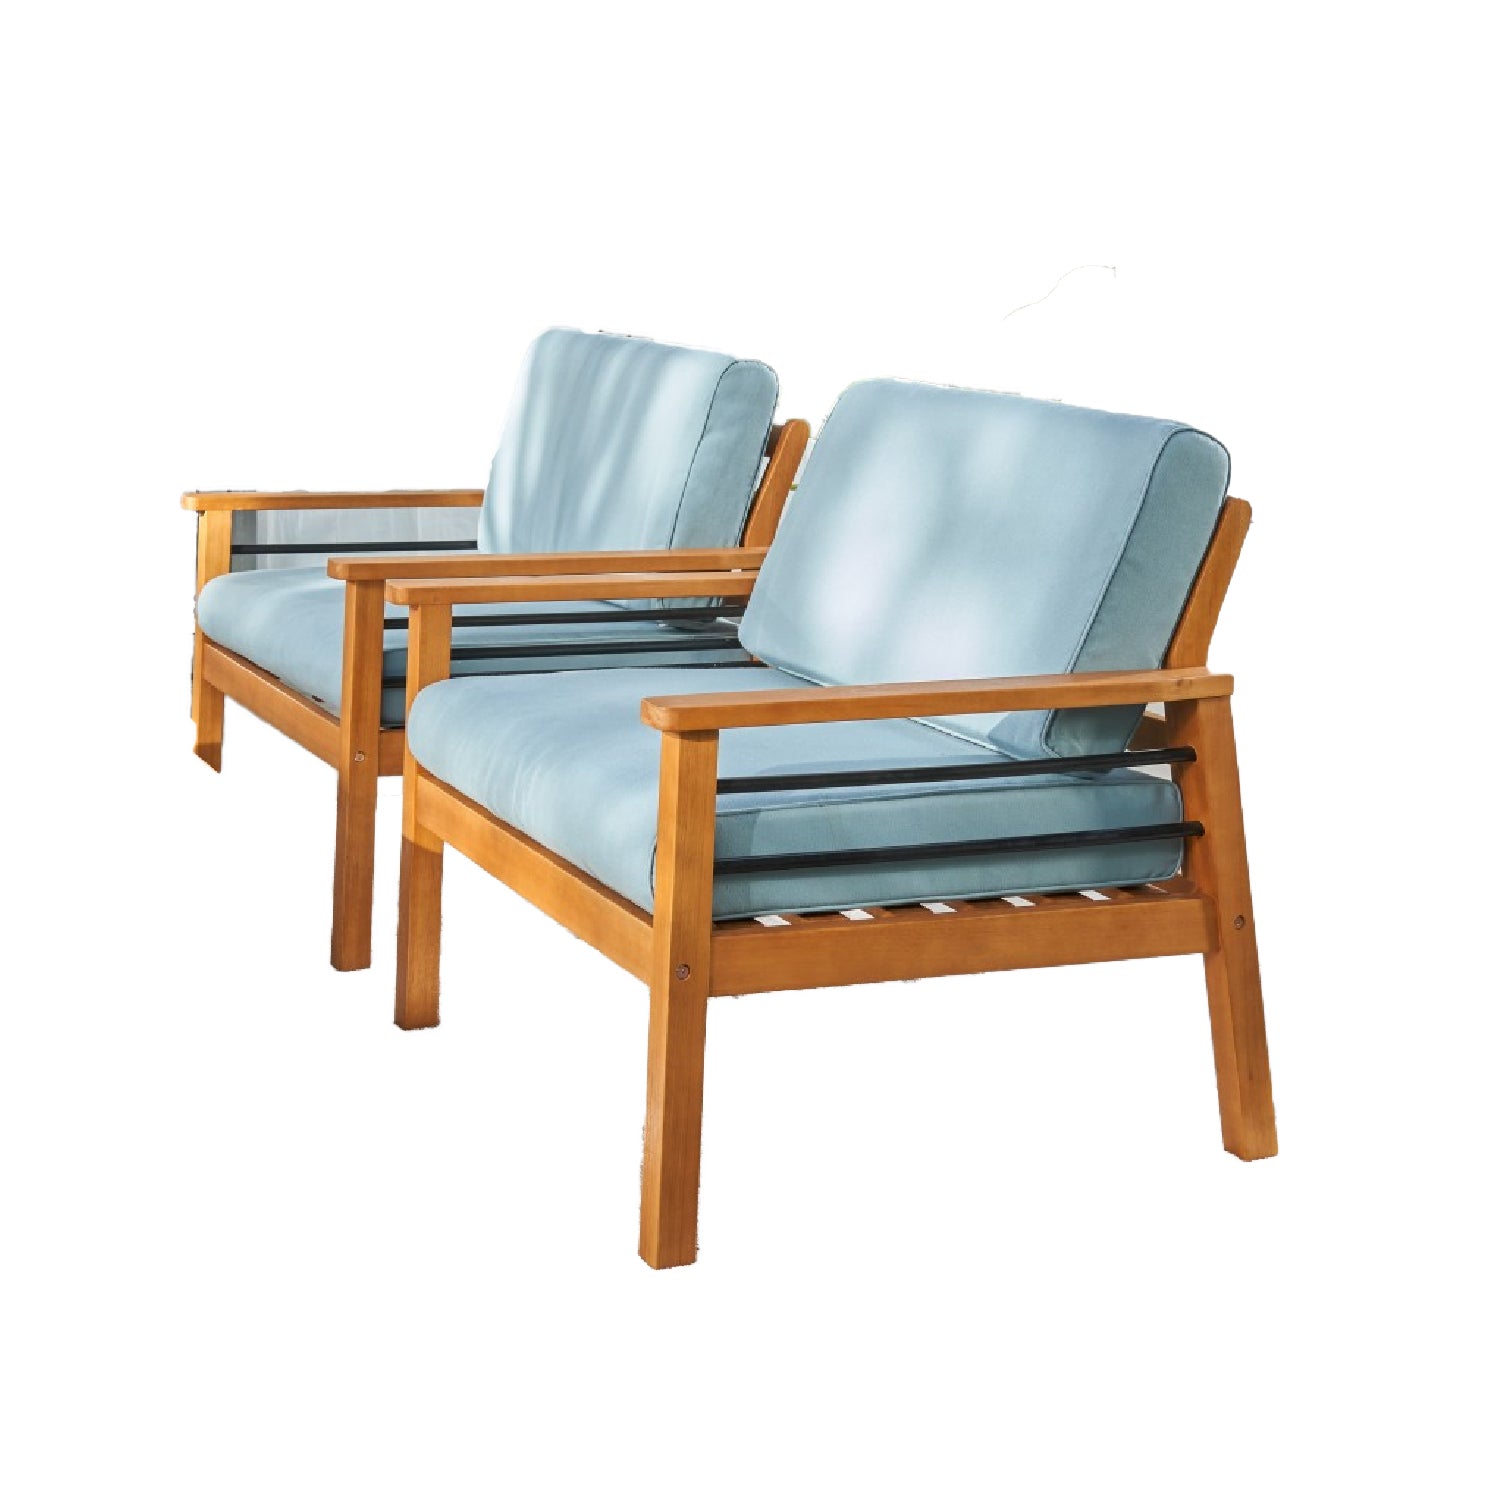 Natural Wood Outdoor Armchair with Aqua Cushion - Tuesday Morning-Outdoor Chairs